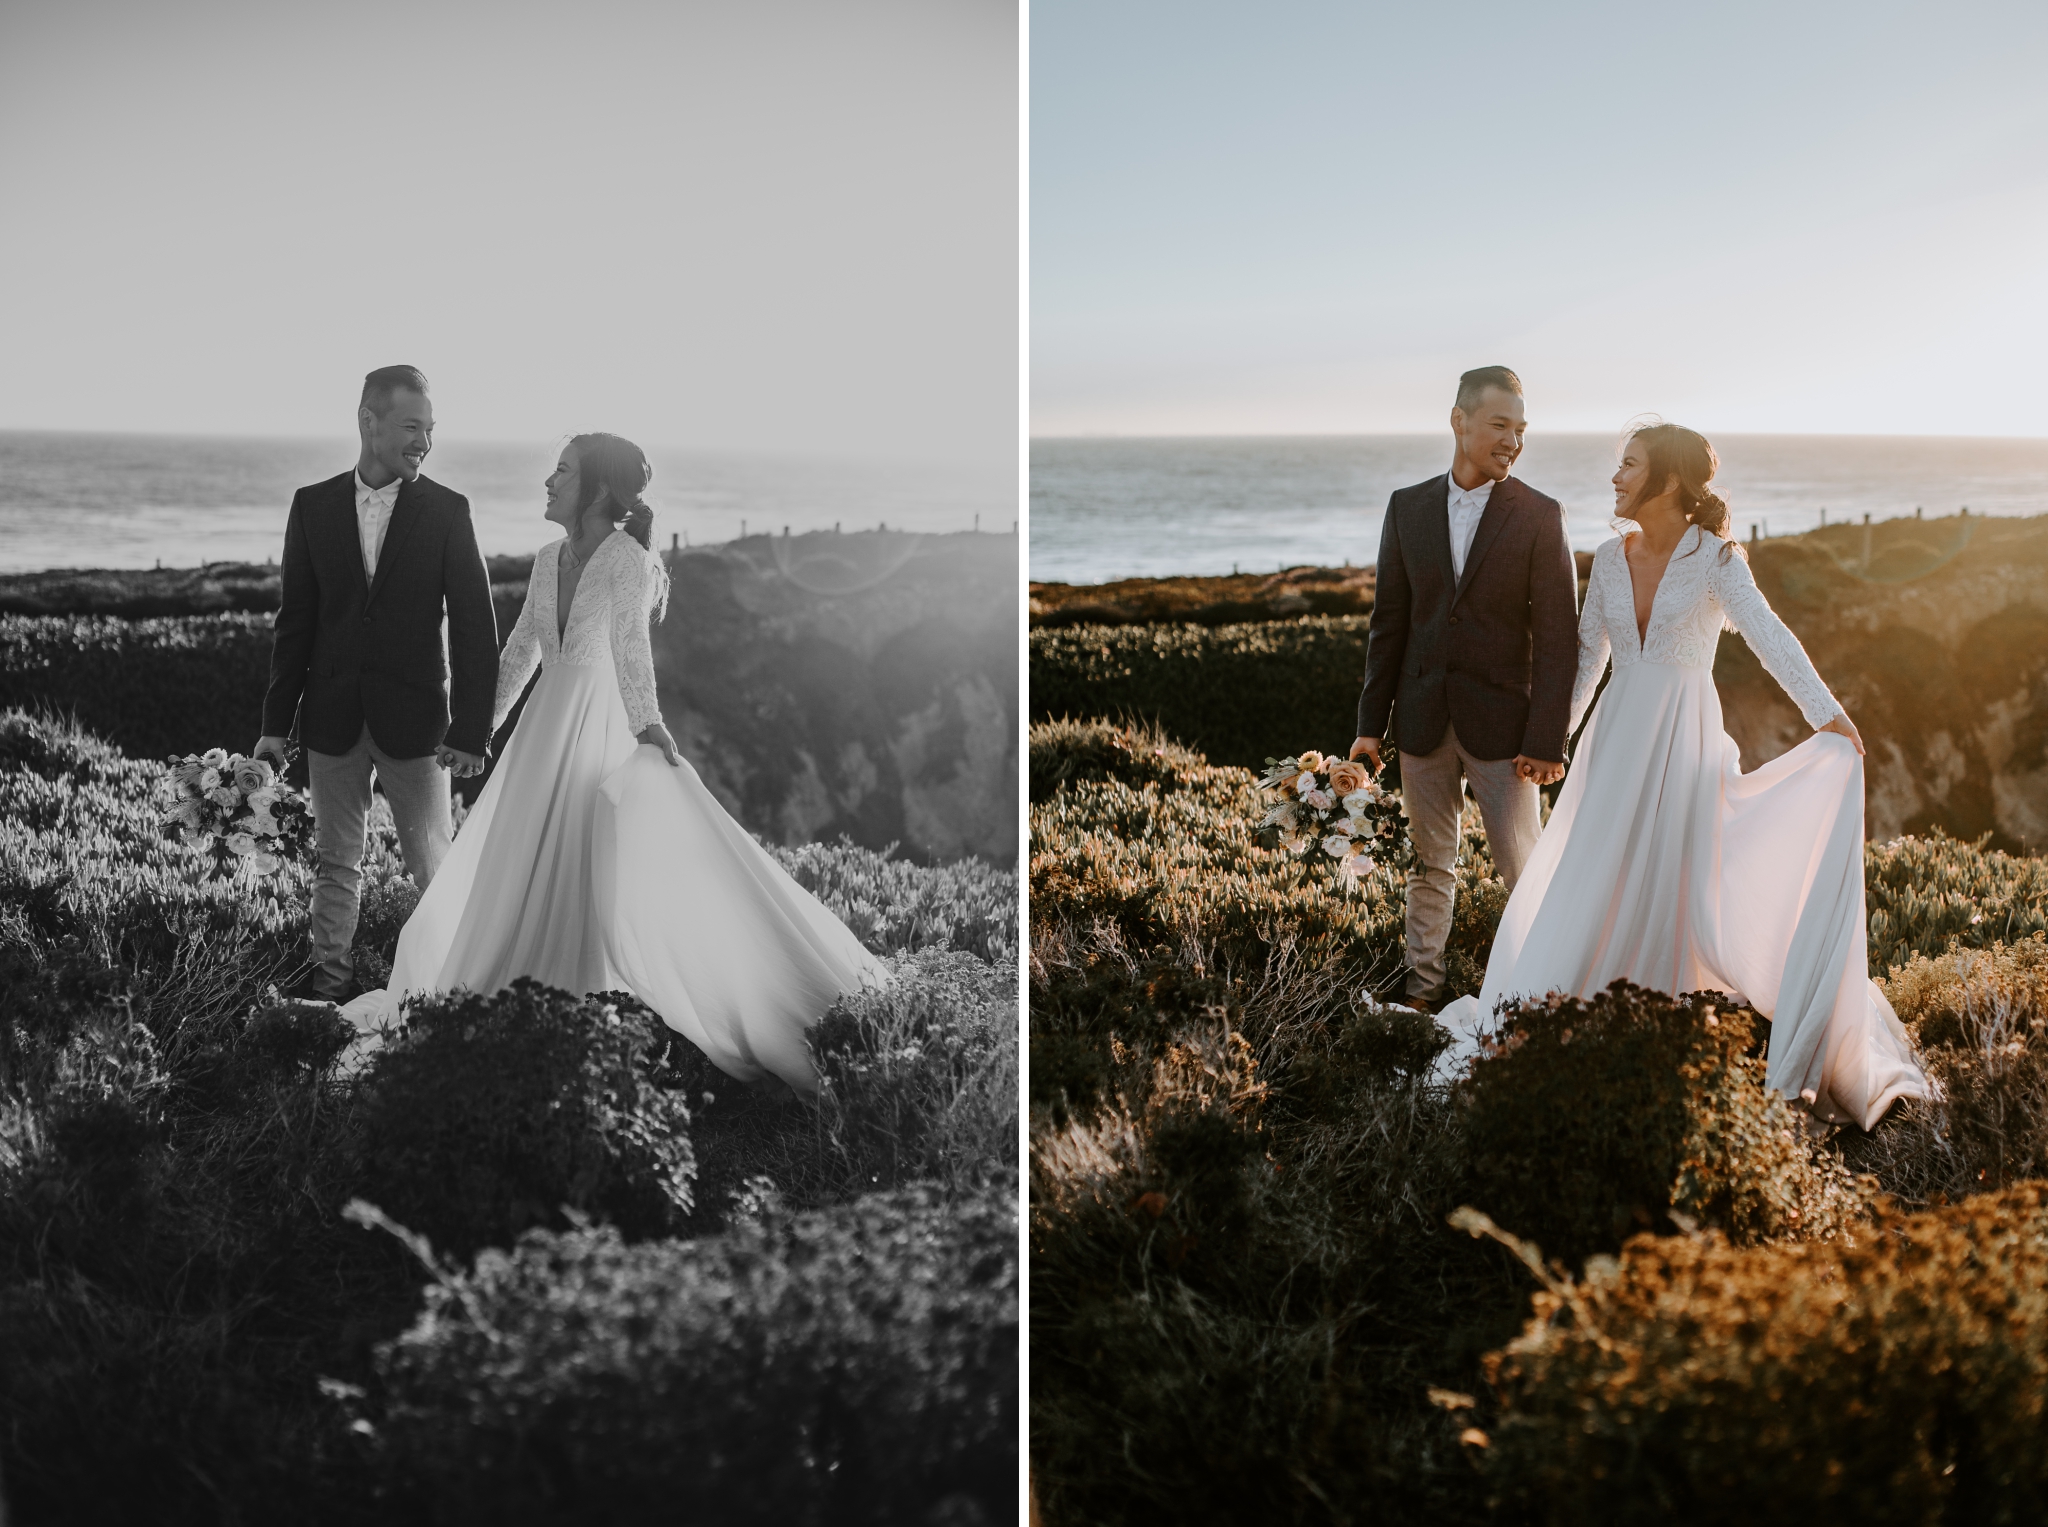 Where to Elope in Big Sur